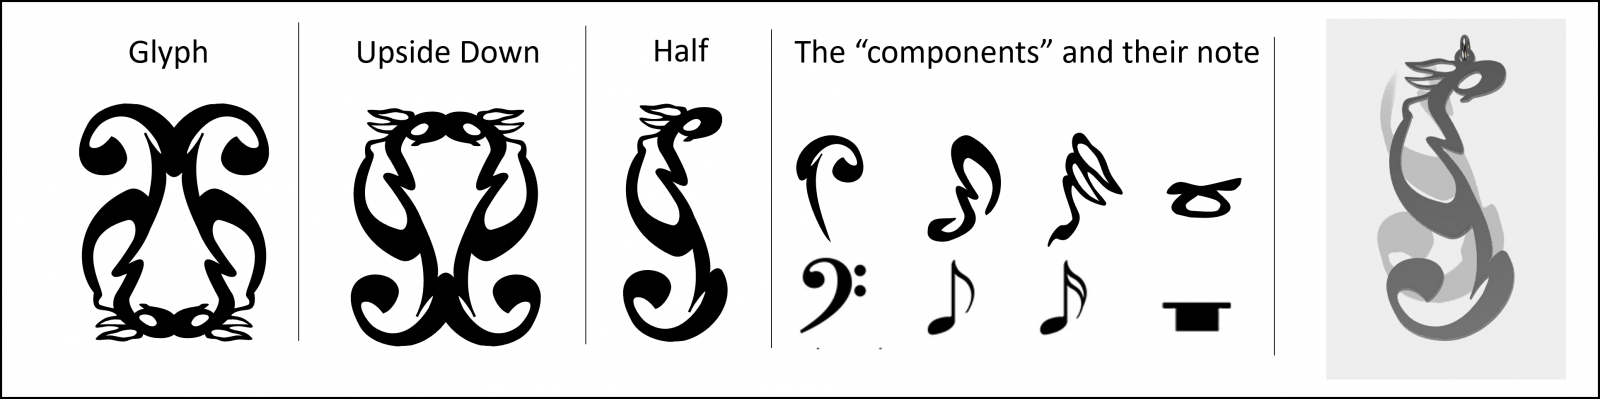 Music_glyph.png